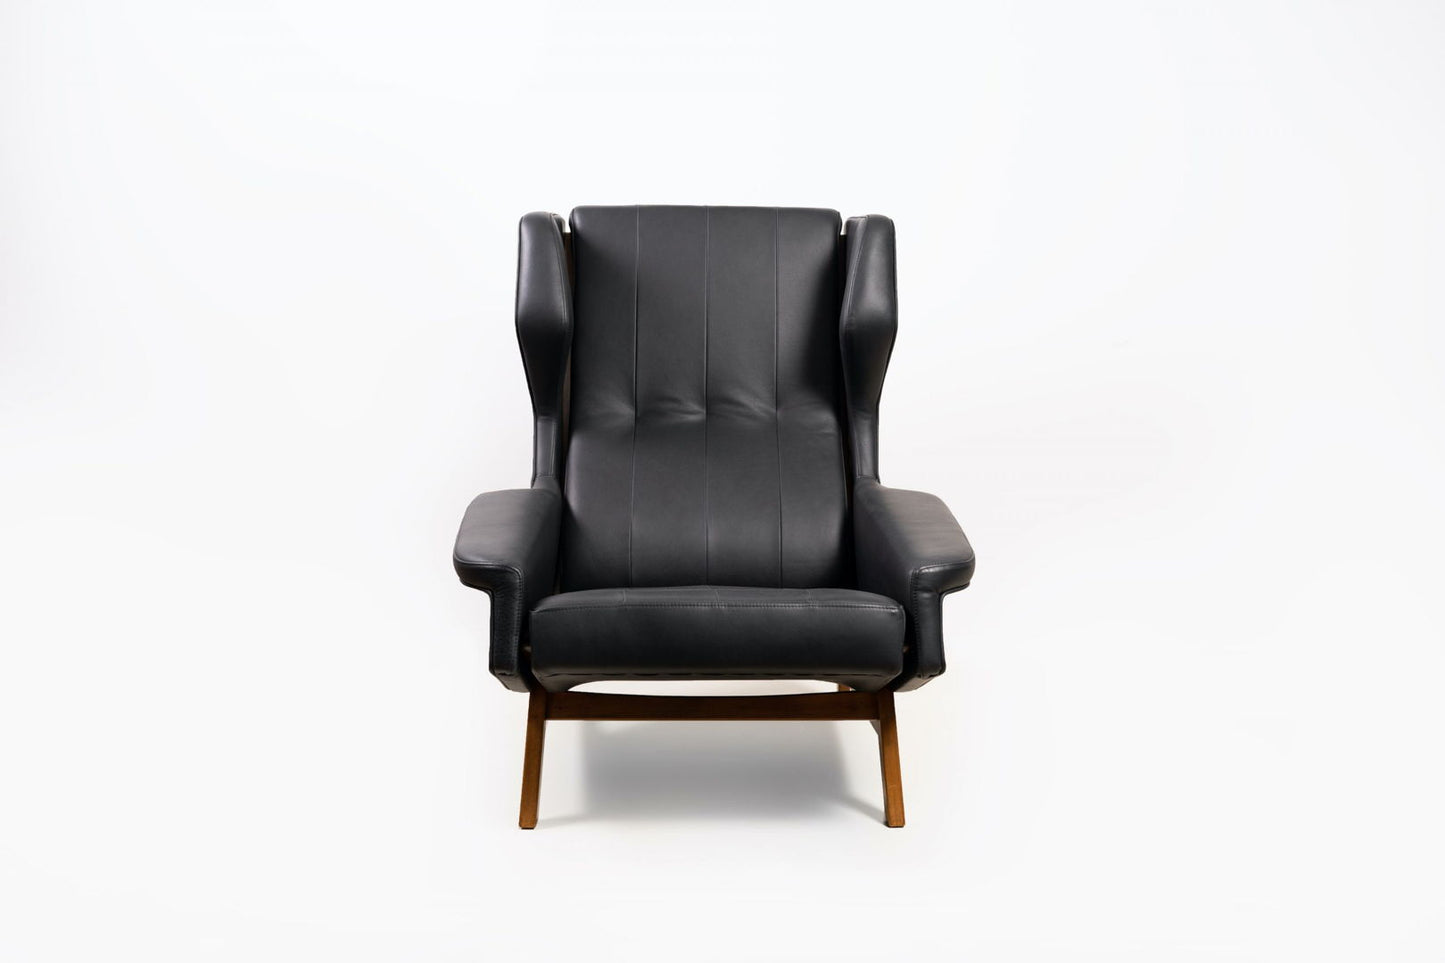 877 Wingback armchair by Gianfranco Frattini for Cassina 1959